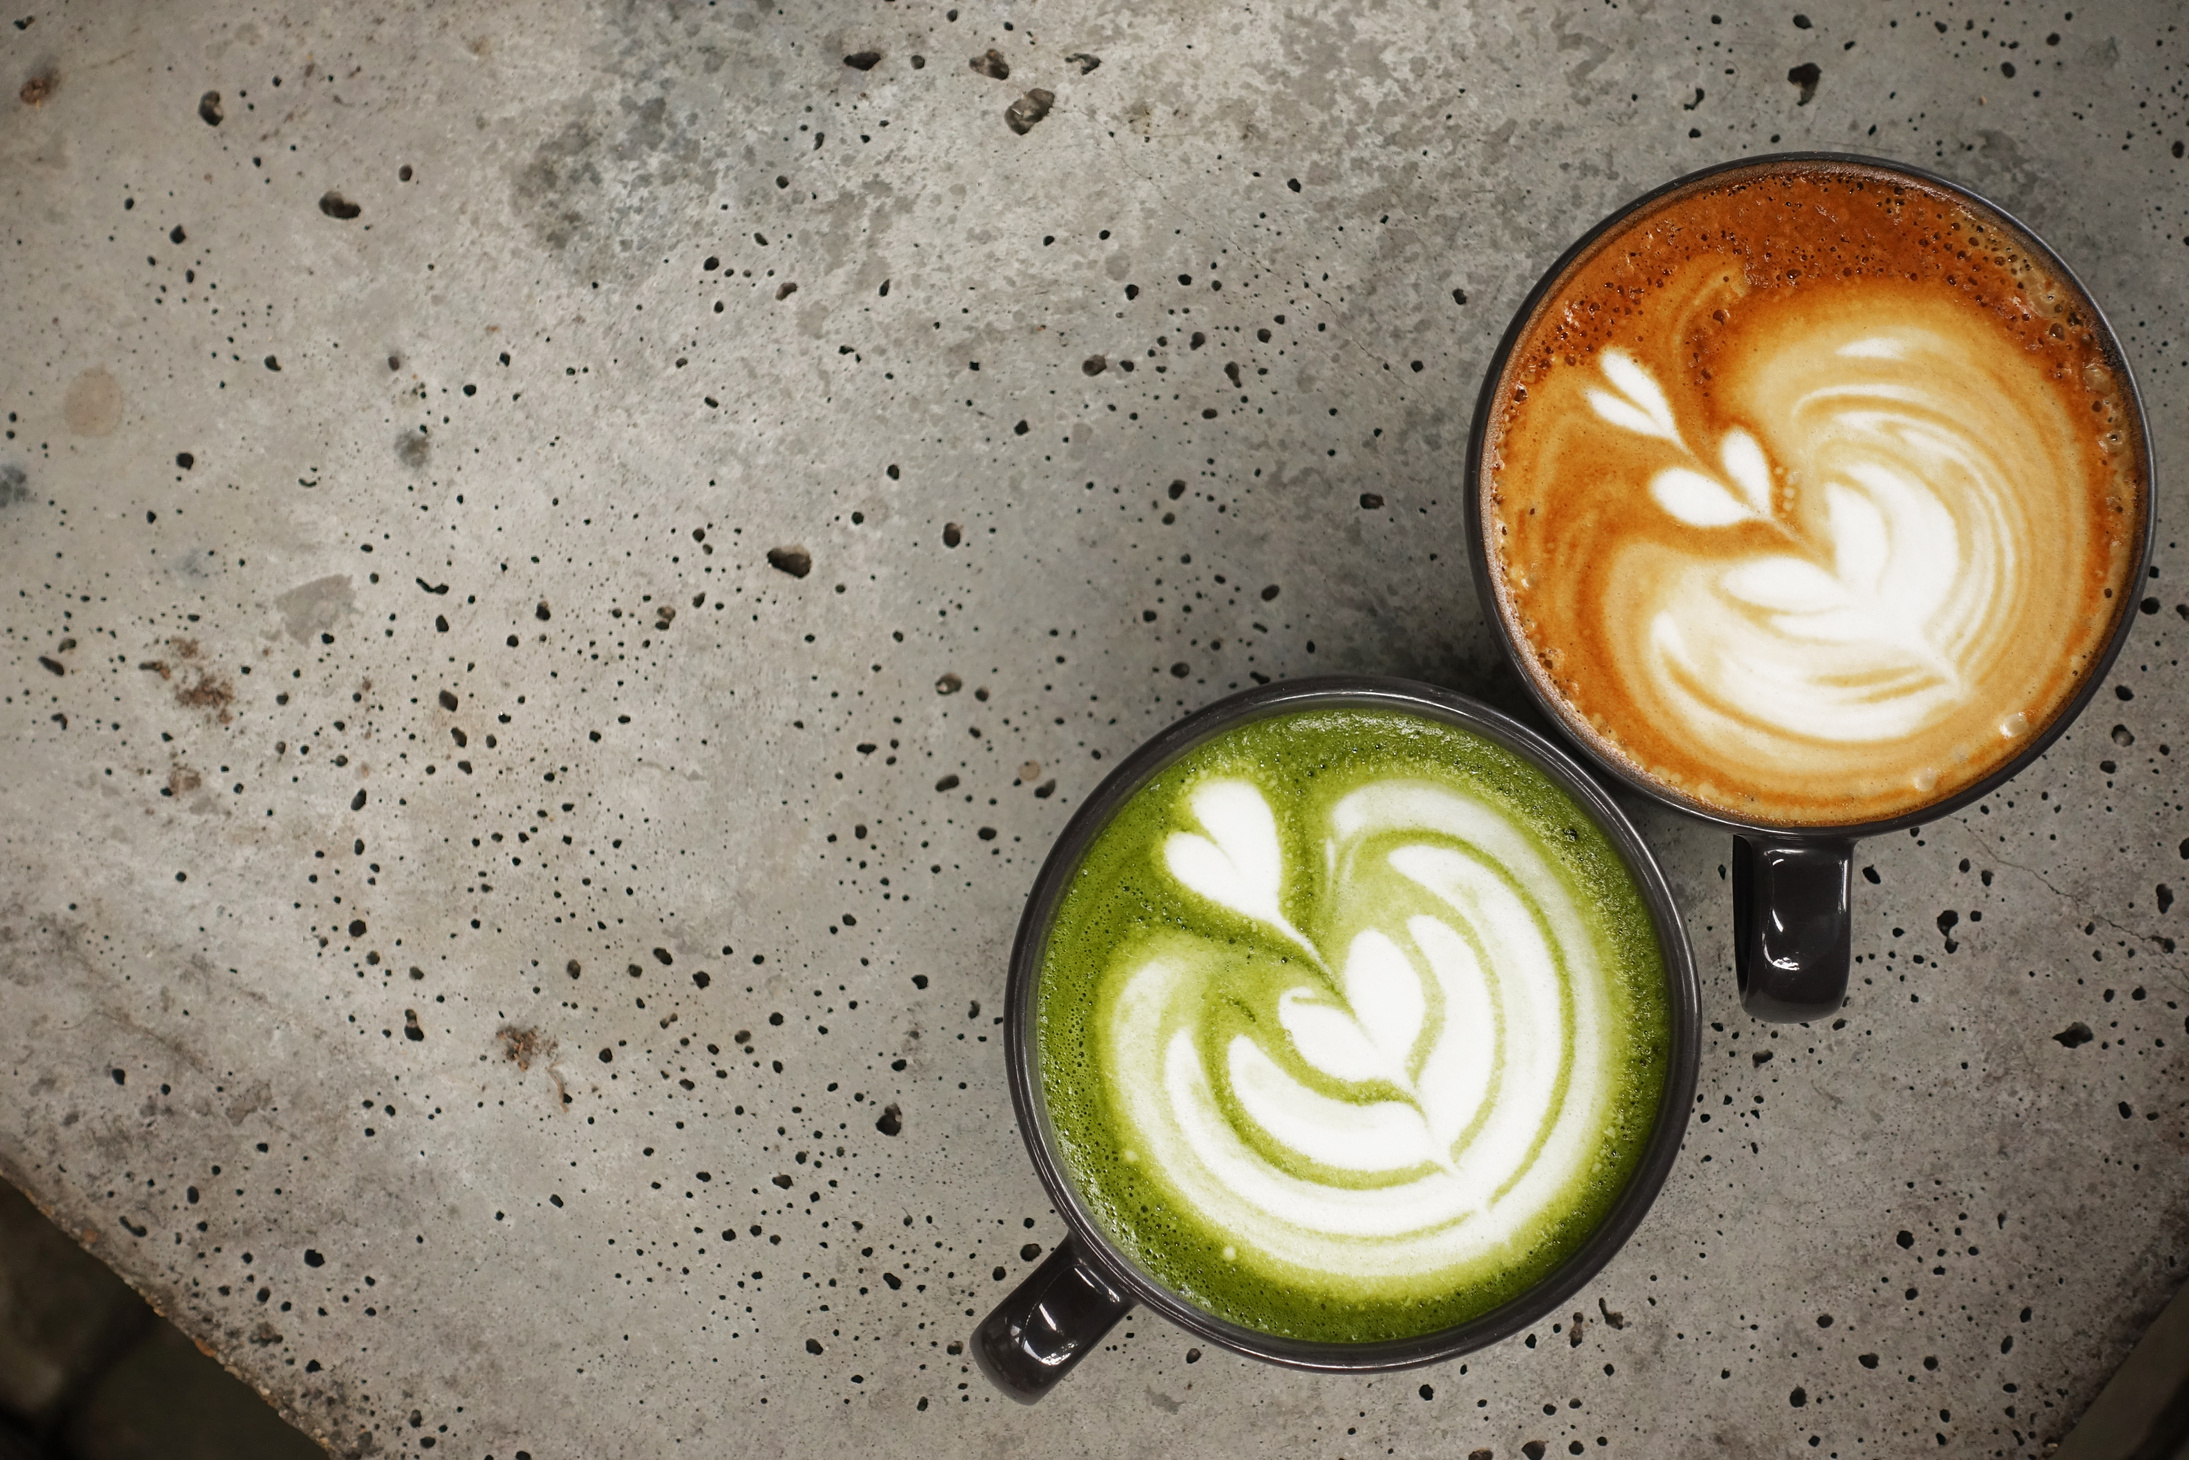 A cup of green tea matcha latte and cup of latte art coffee